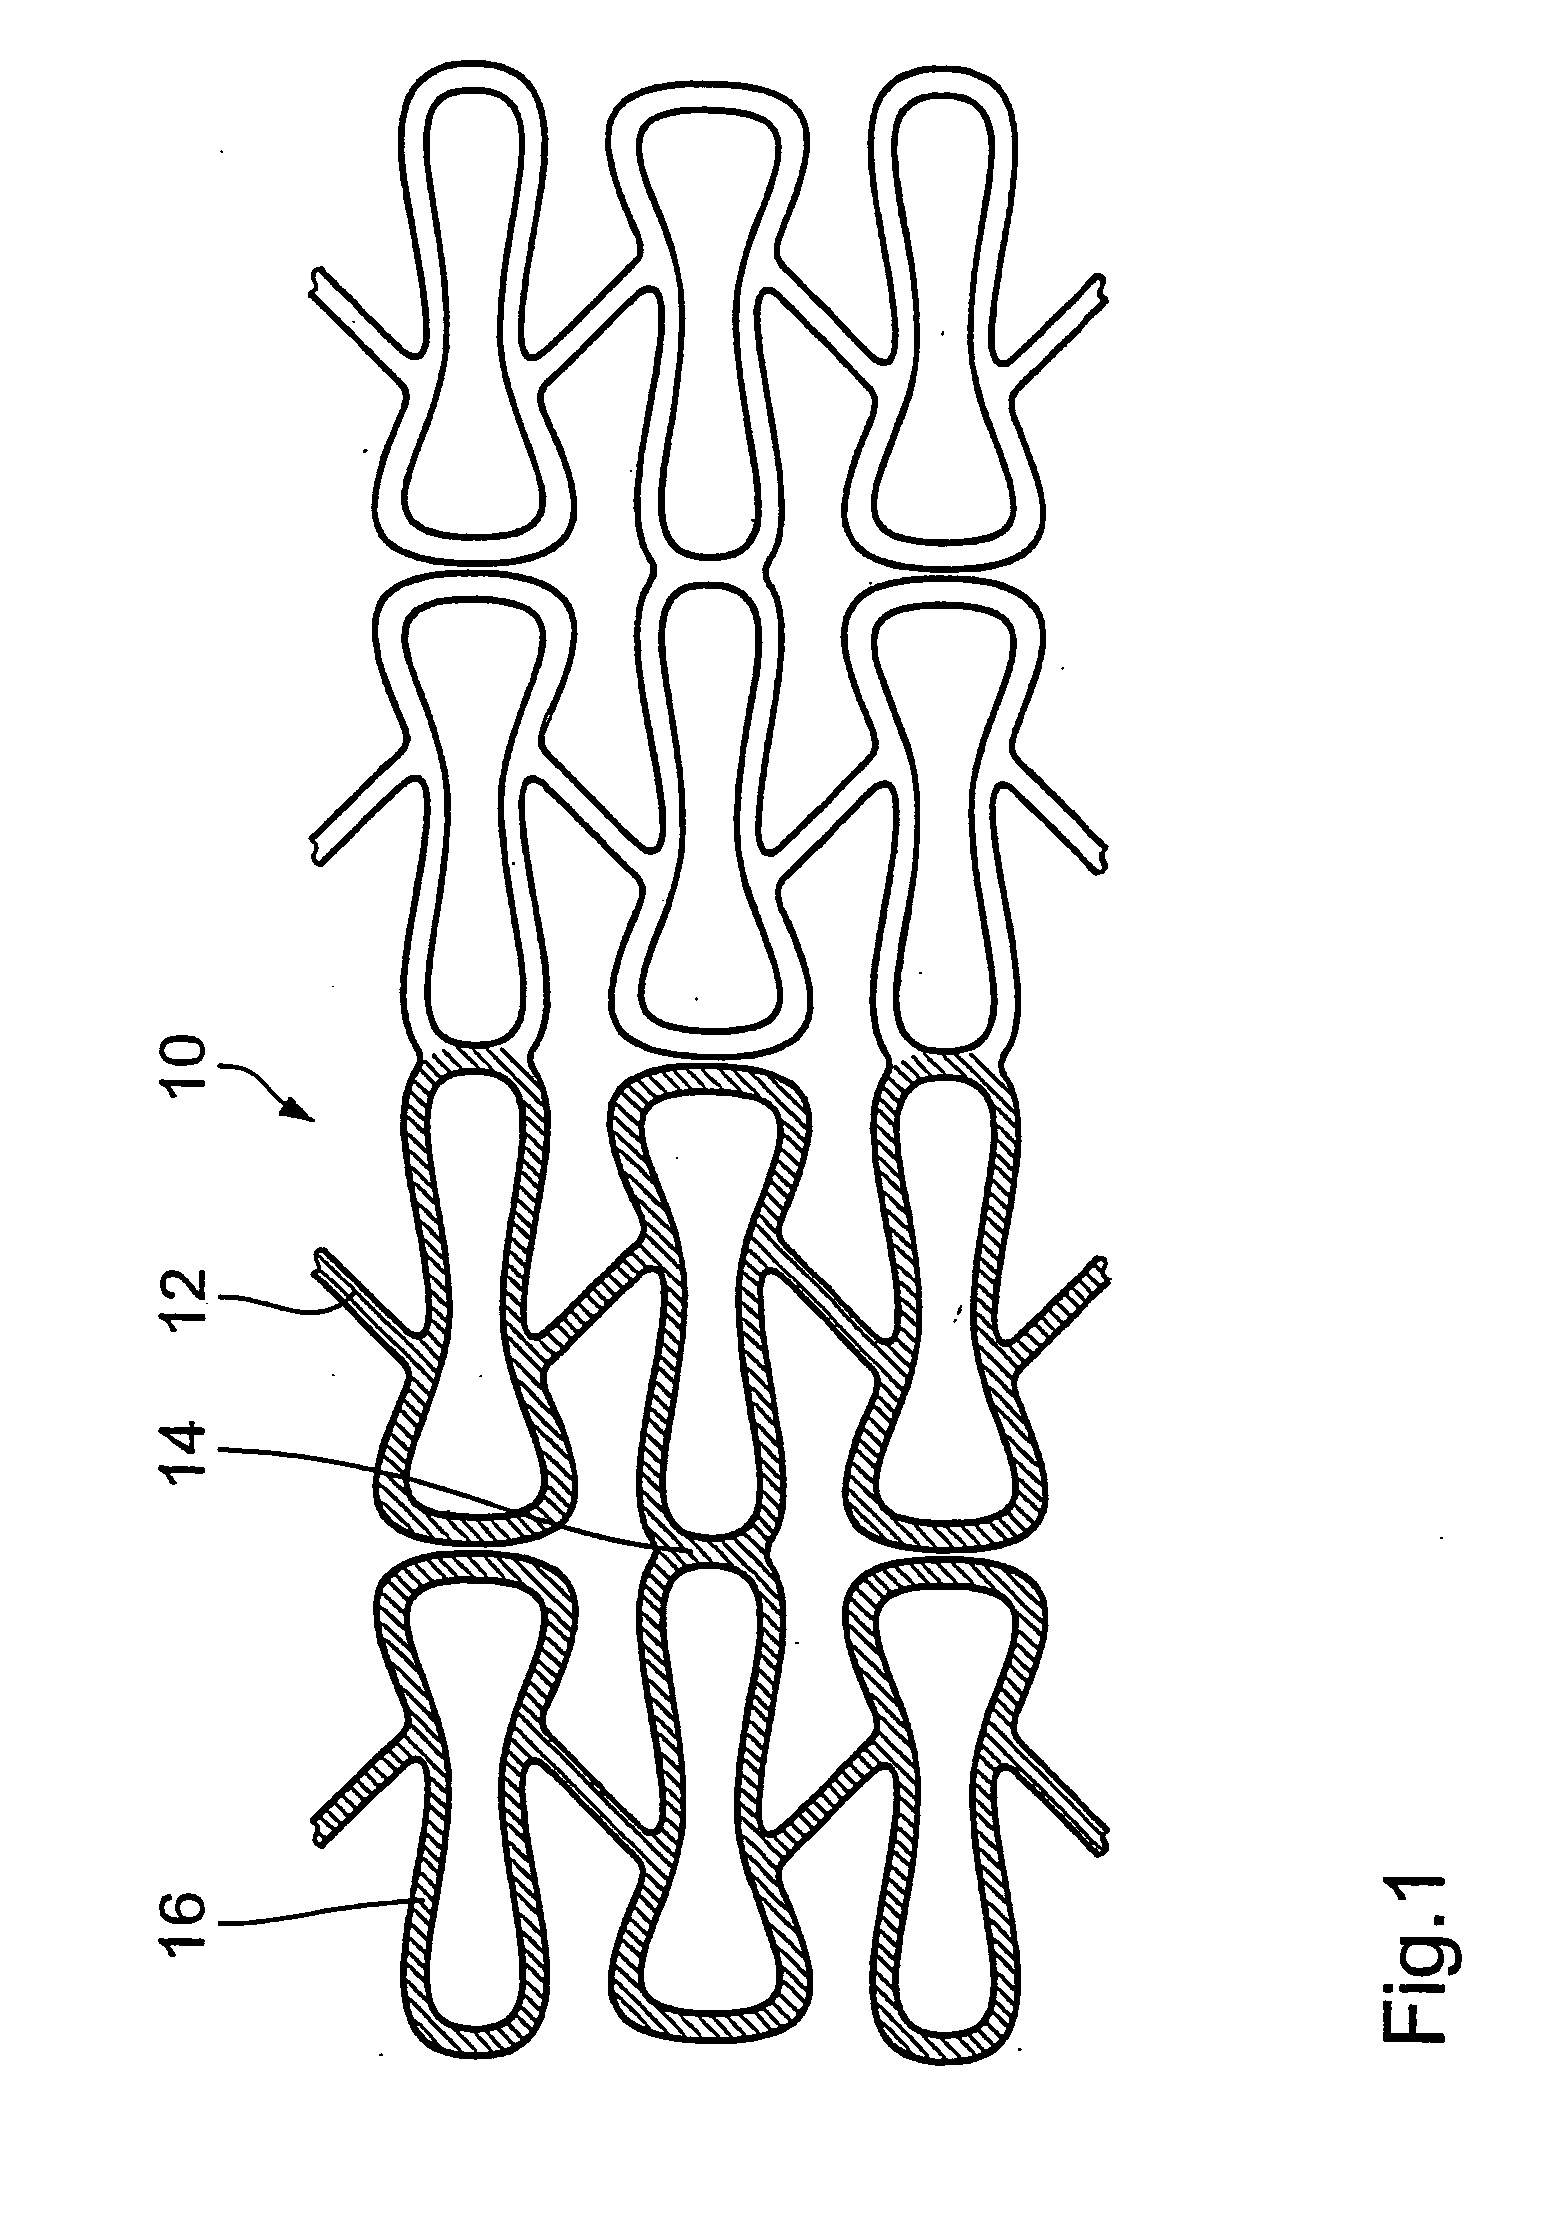 Stent with polymeric coating